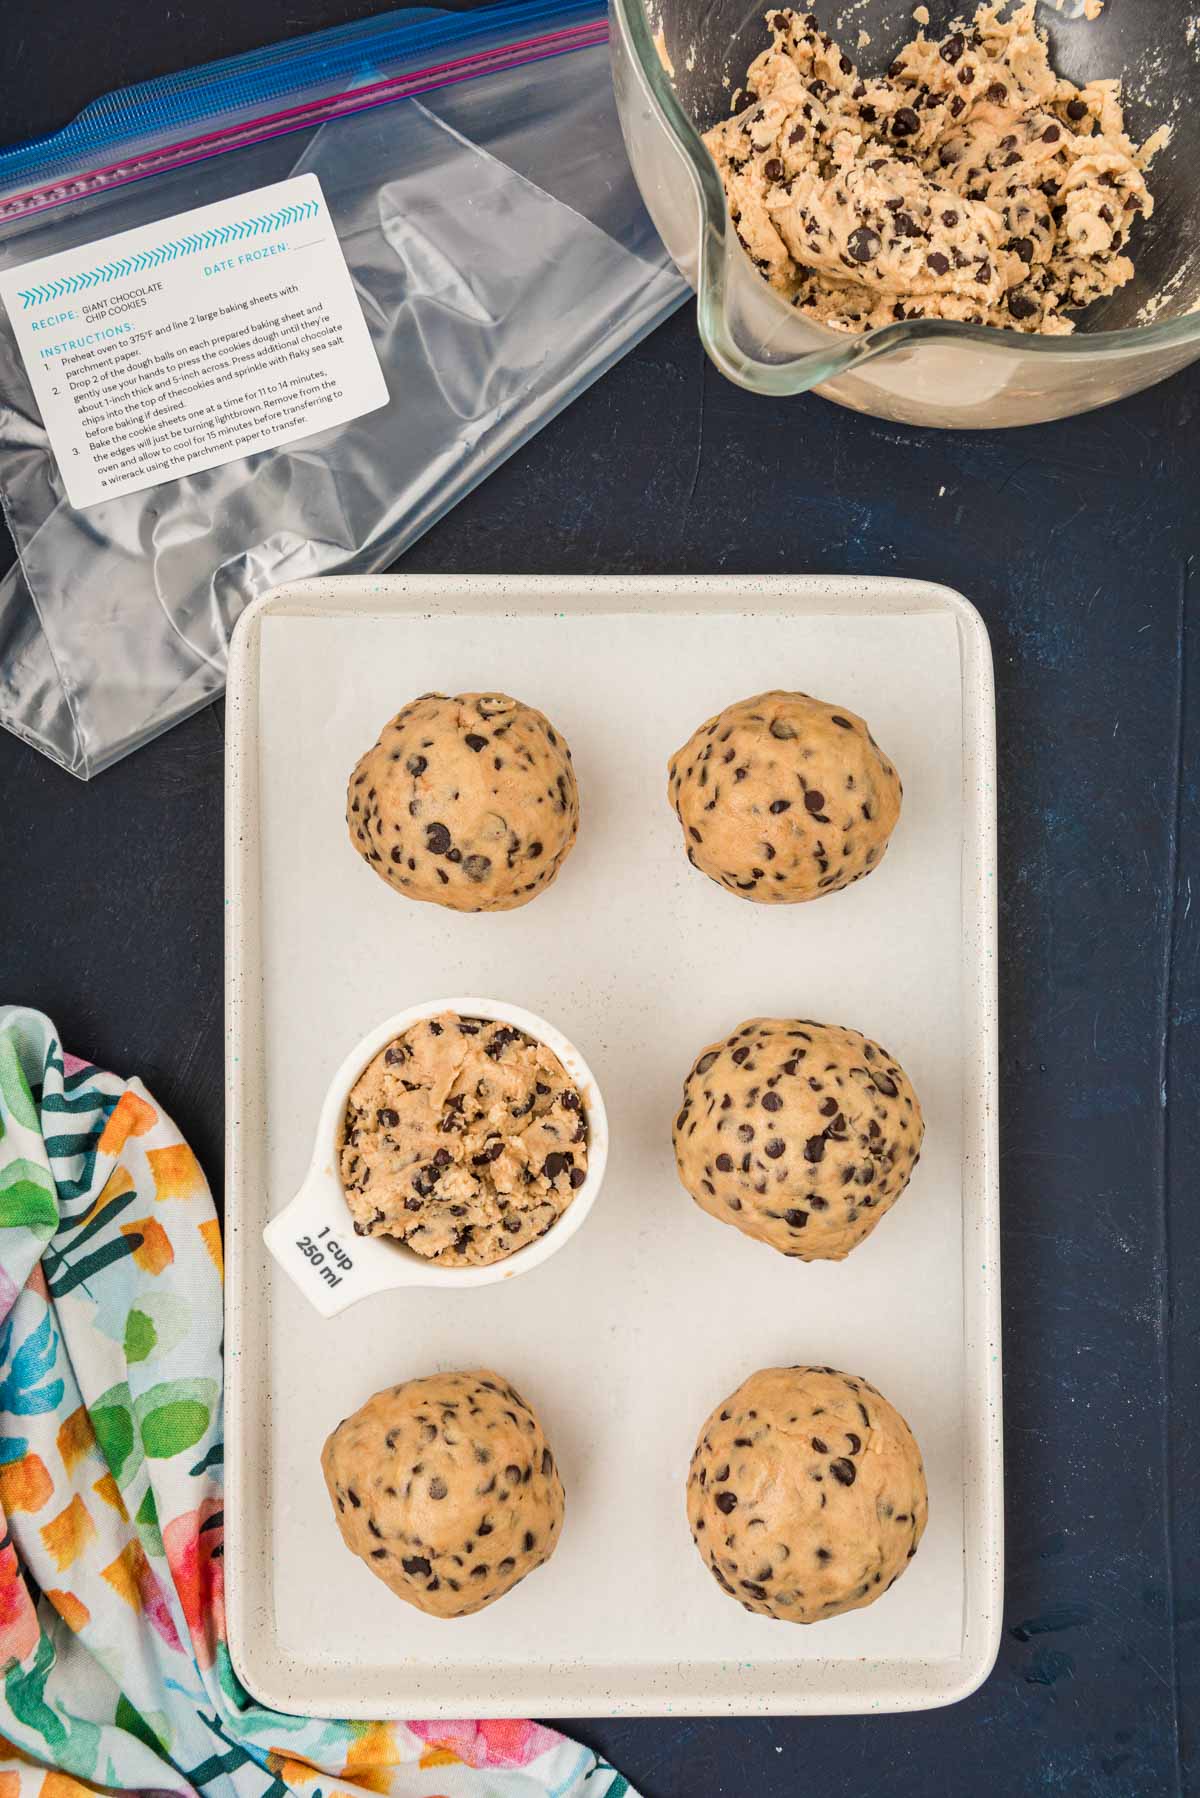 https://www.sugarandsoul.co/wp-content/uploads/2022/09/giant-chocolate-chip-cookies-6.jpg